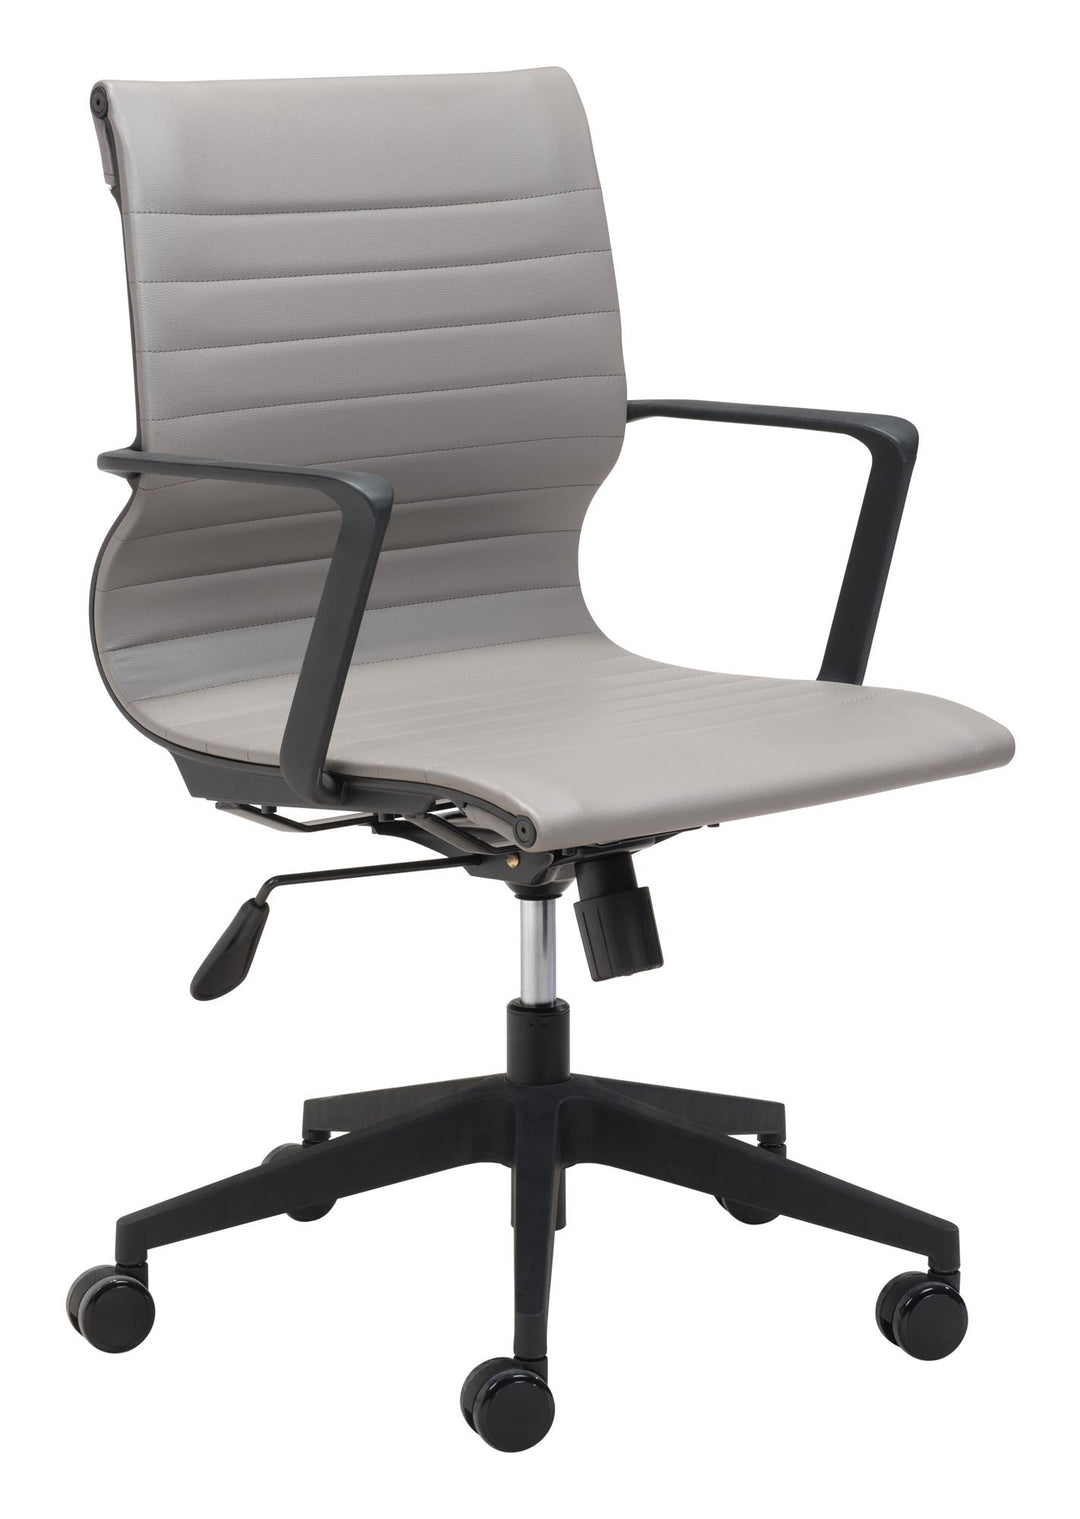 office chair for home - Gray